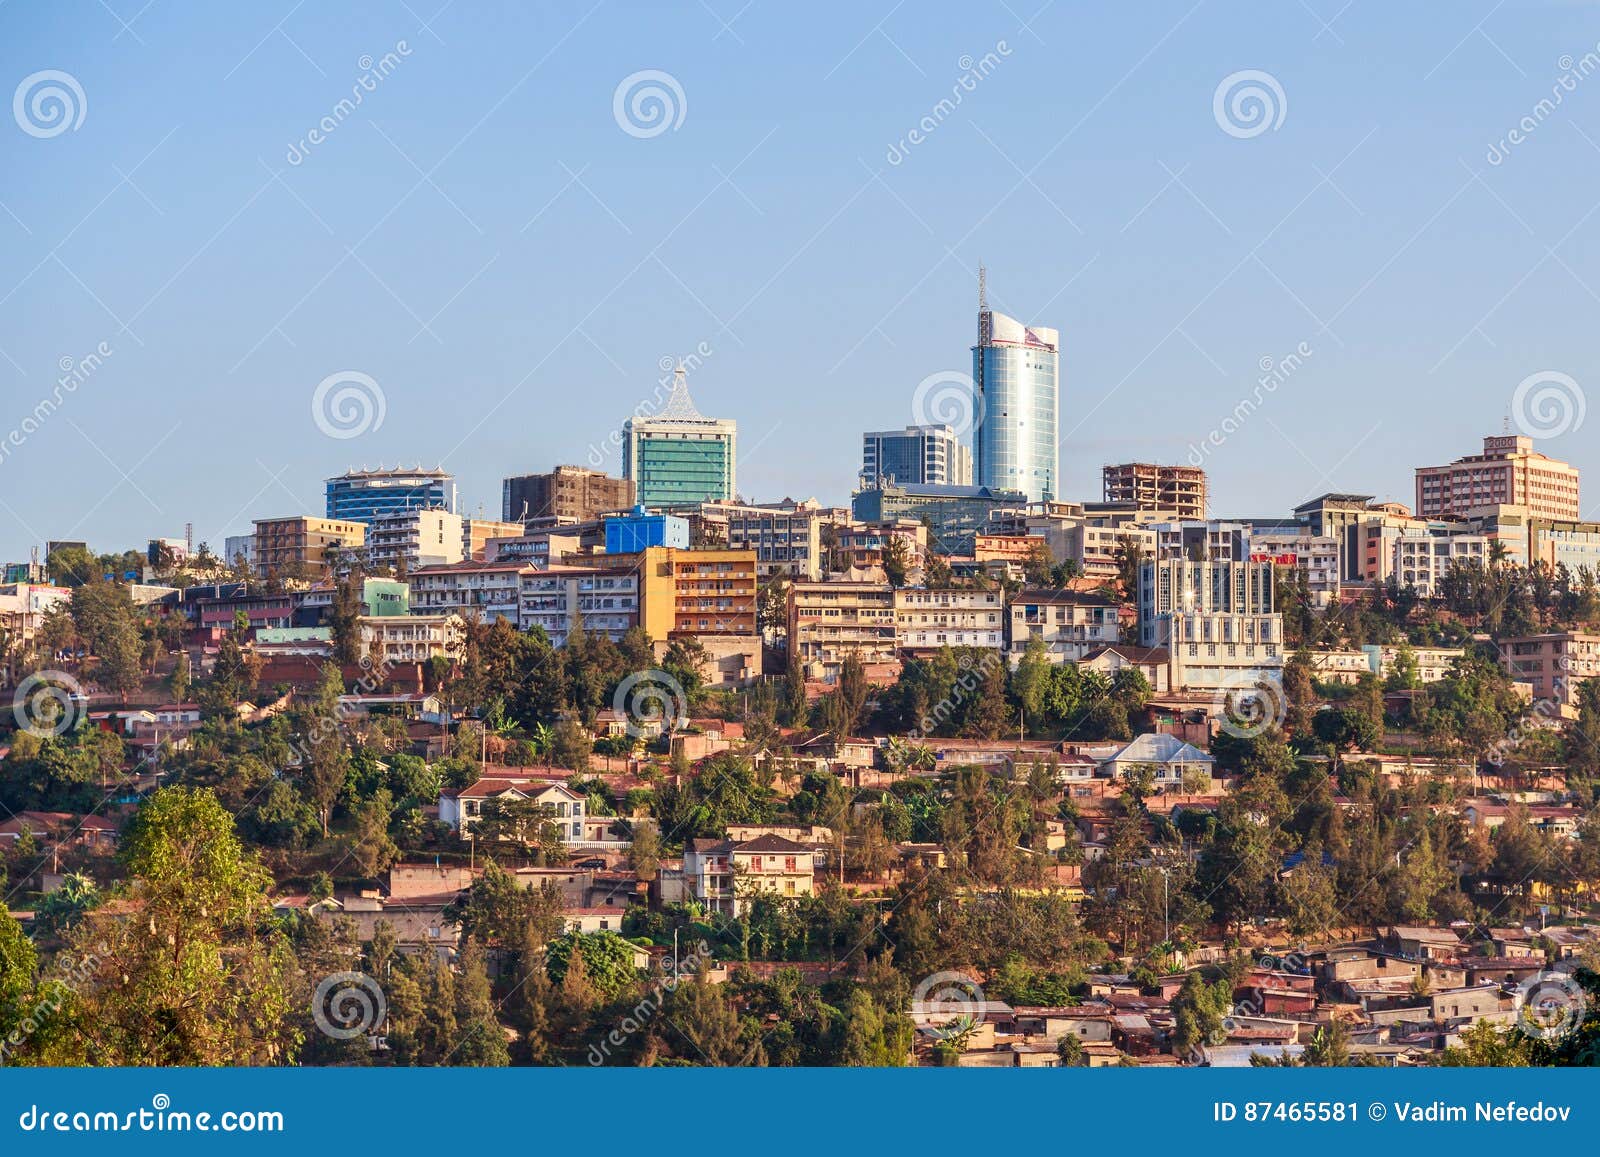 panoramic view at the city bussiness district of kigali, rwanda, 2016